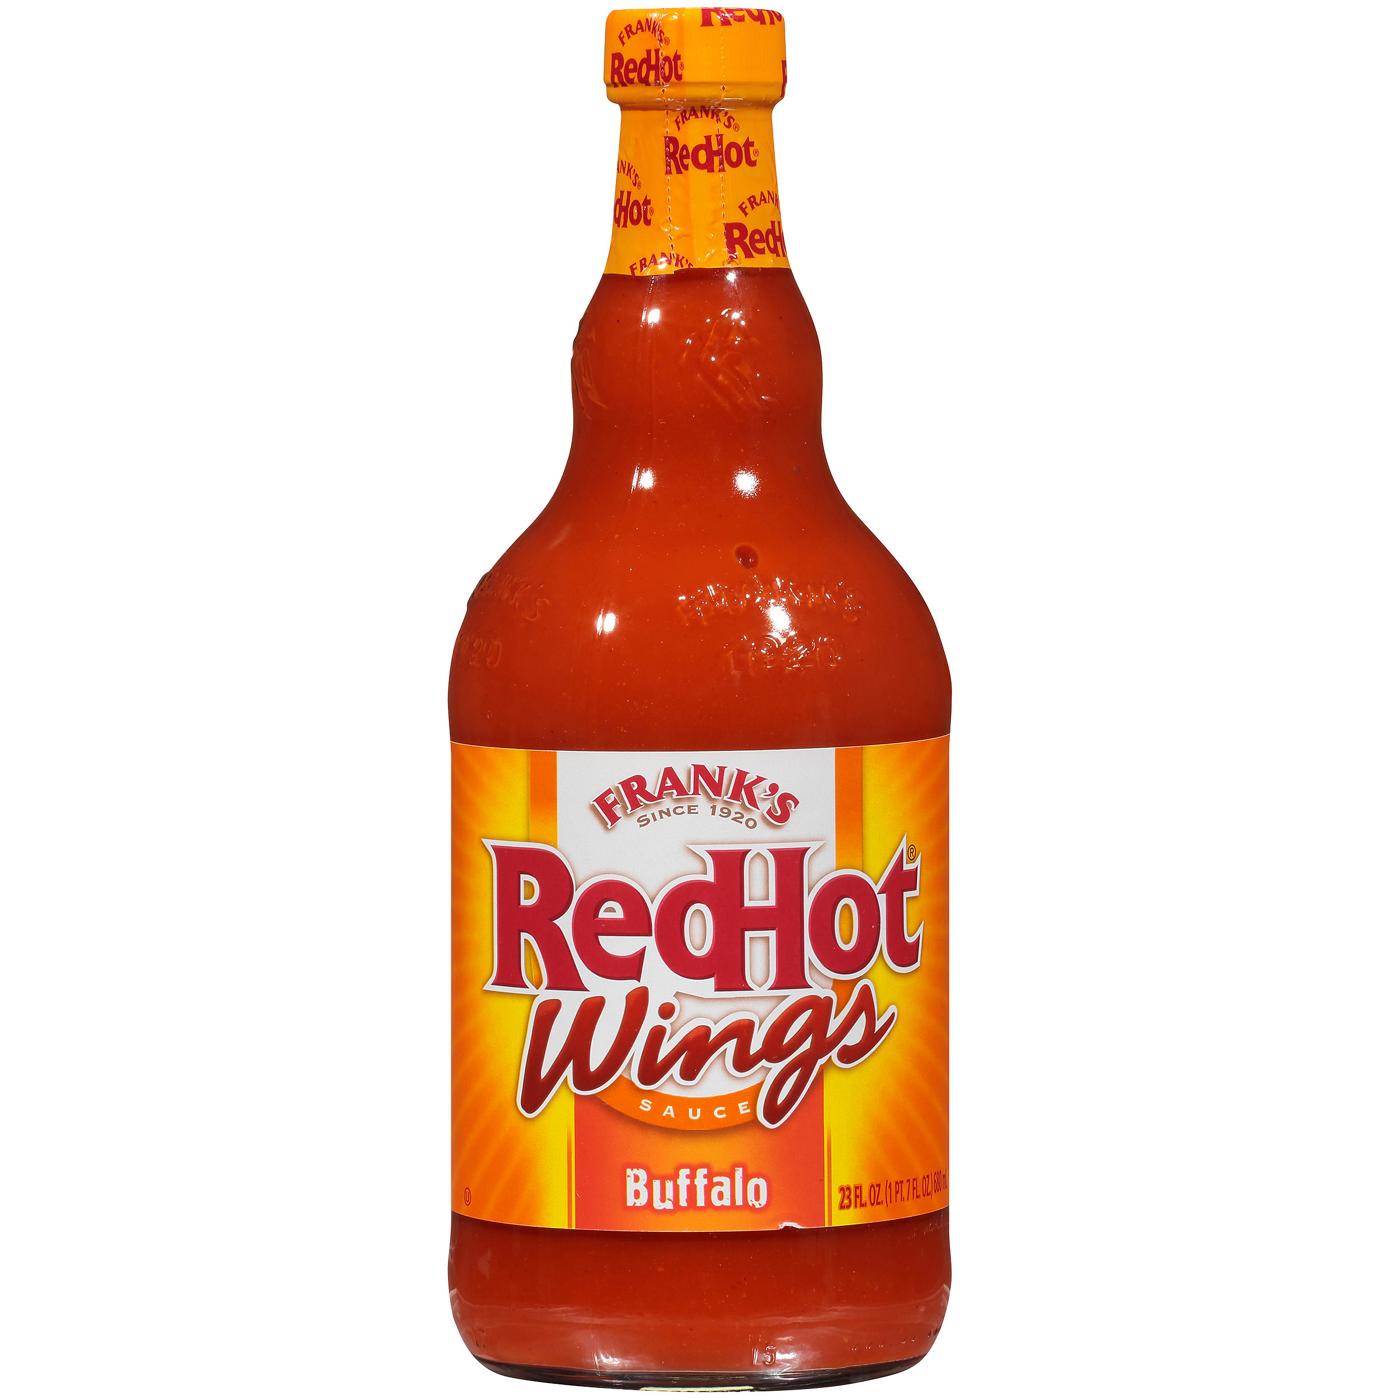 Frank's RedHot Buffalo Wings Hot Sauce; image 1 of 8